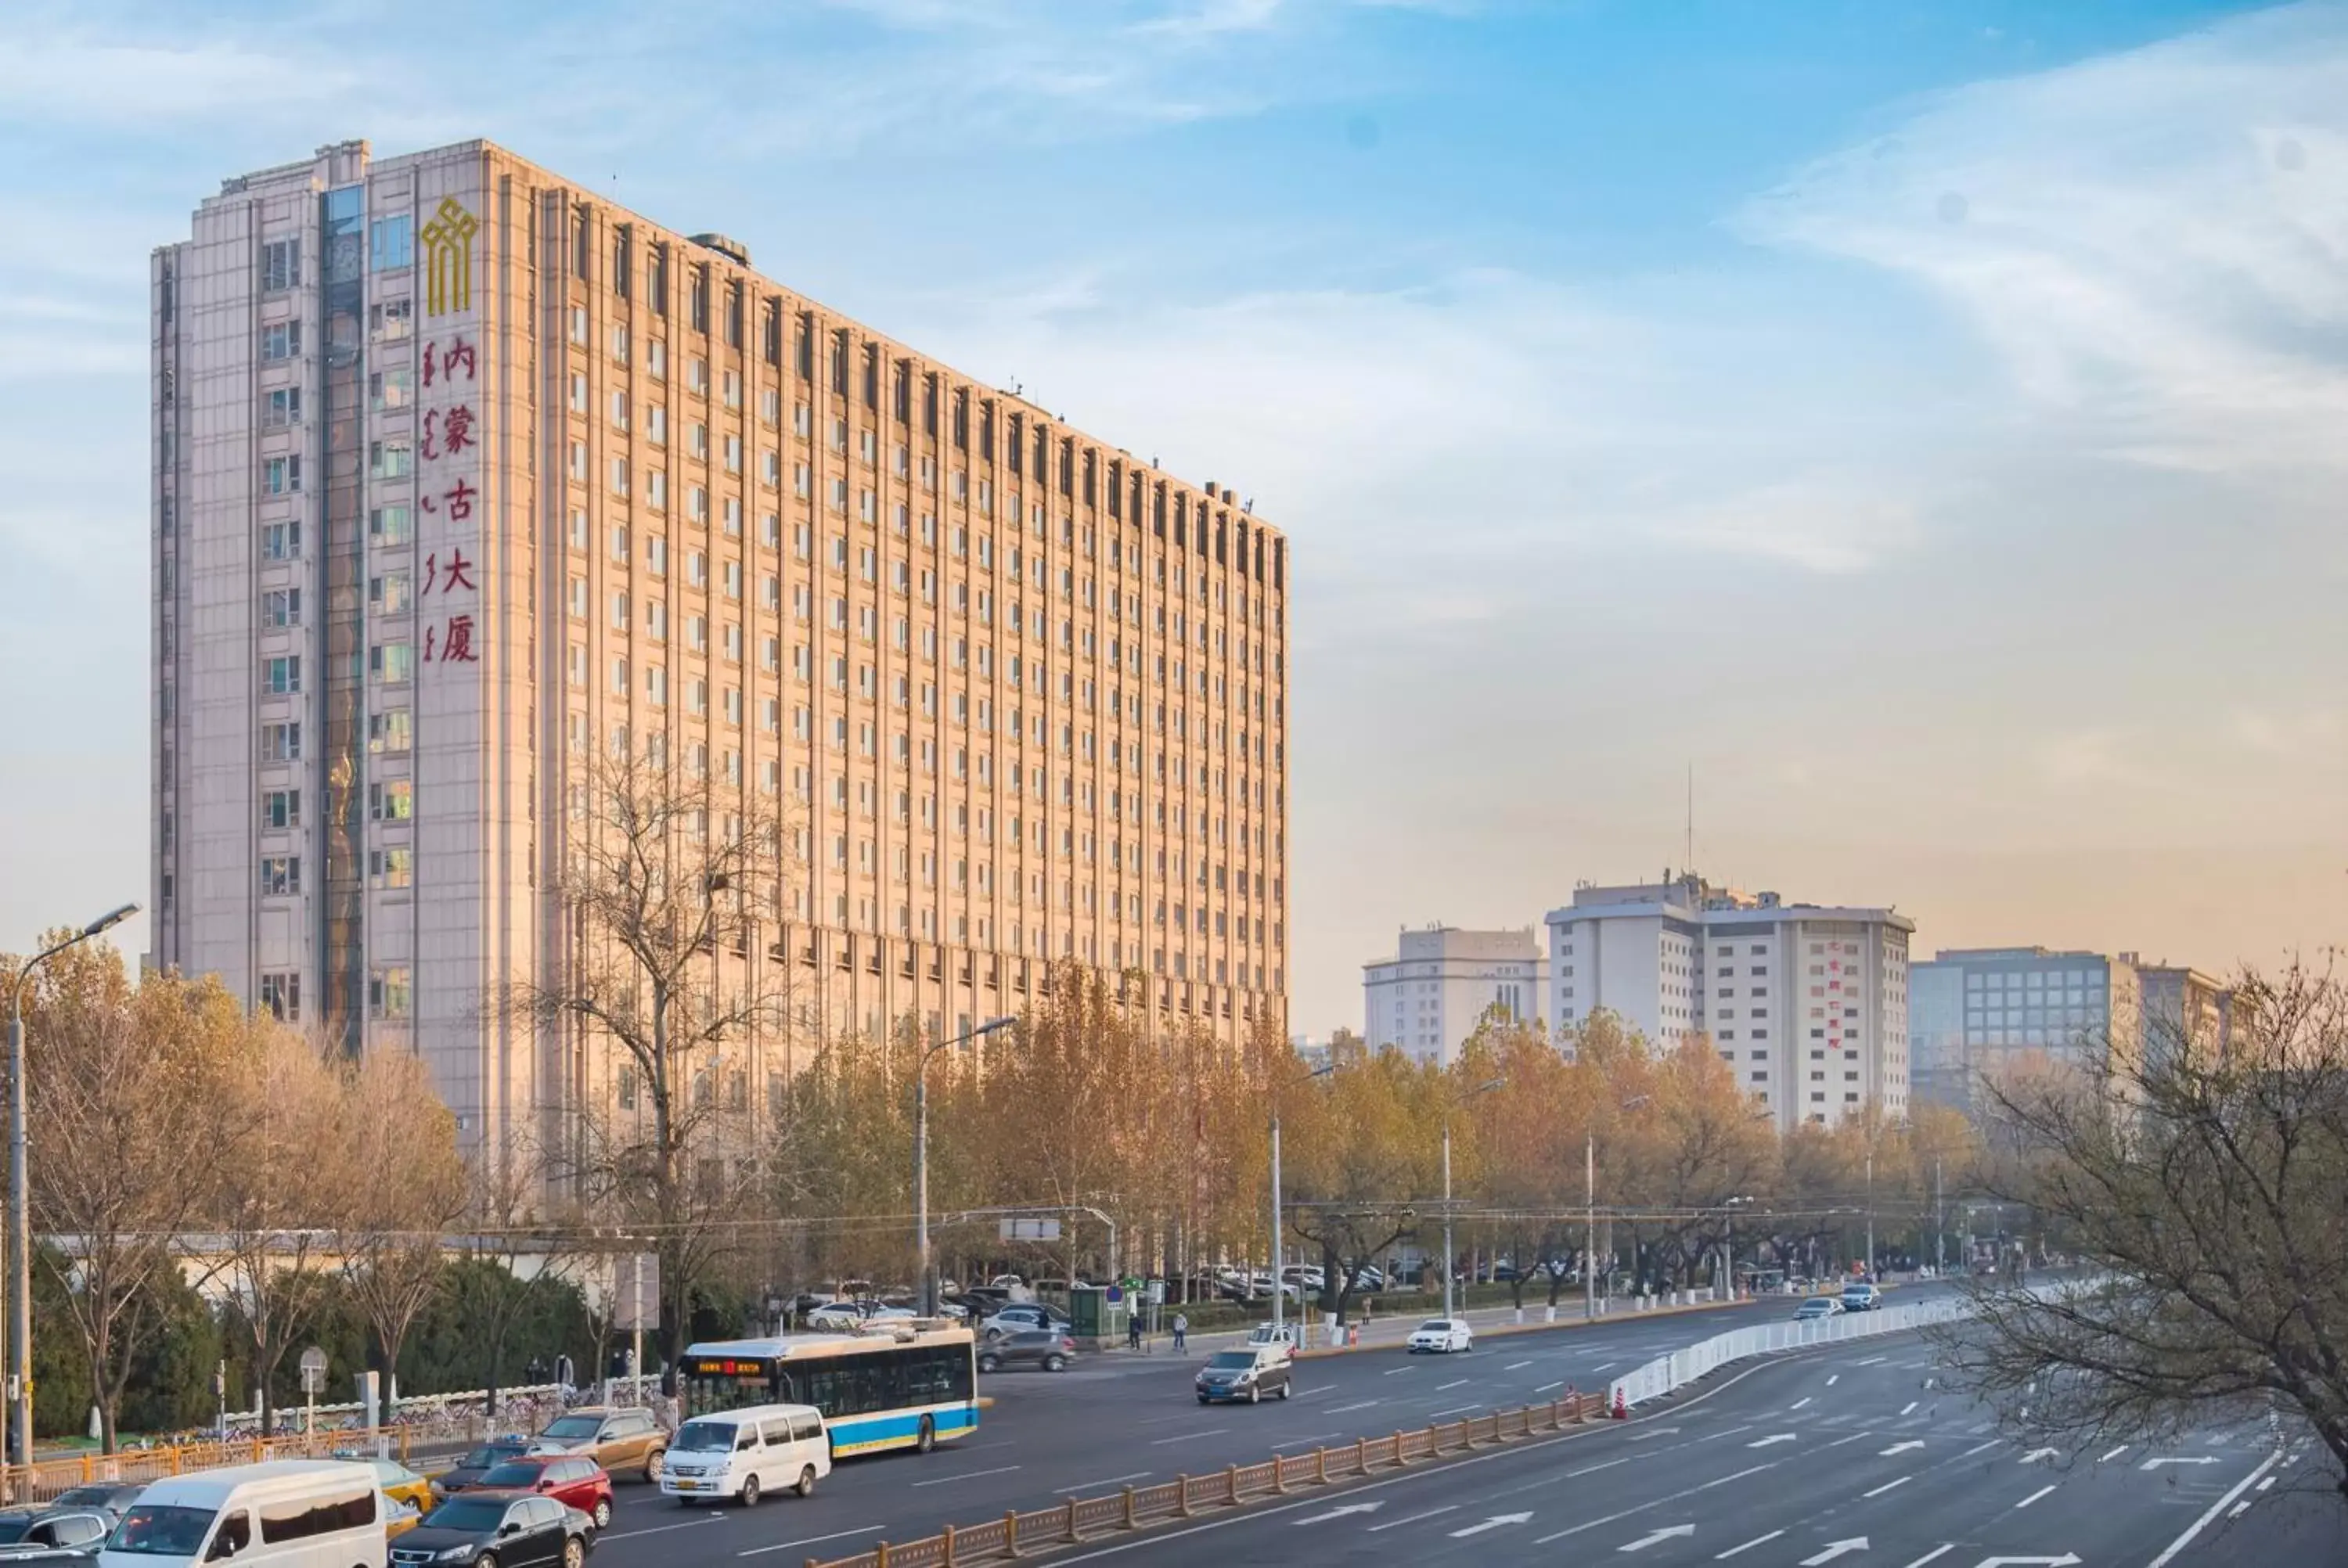 Property building in Inner Mongolia Grand Hotel